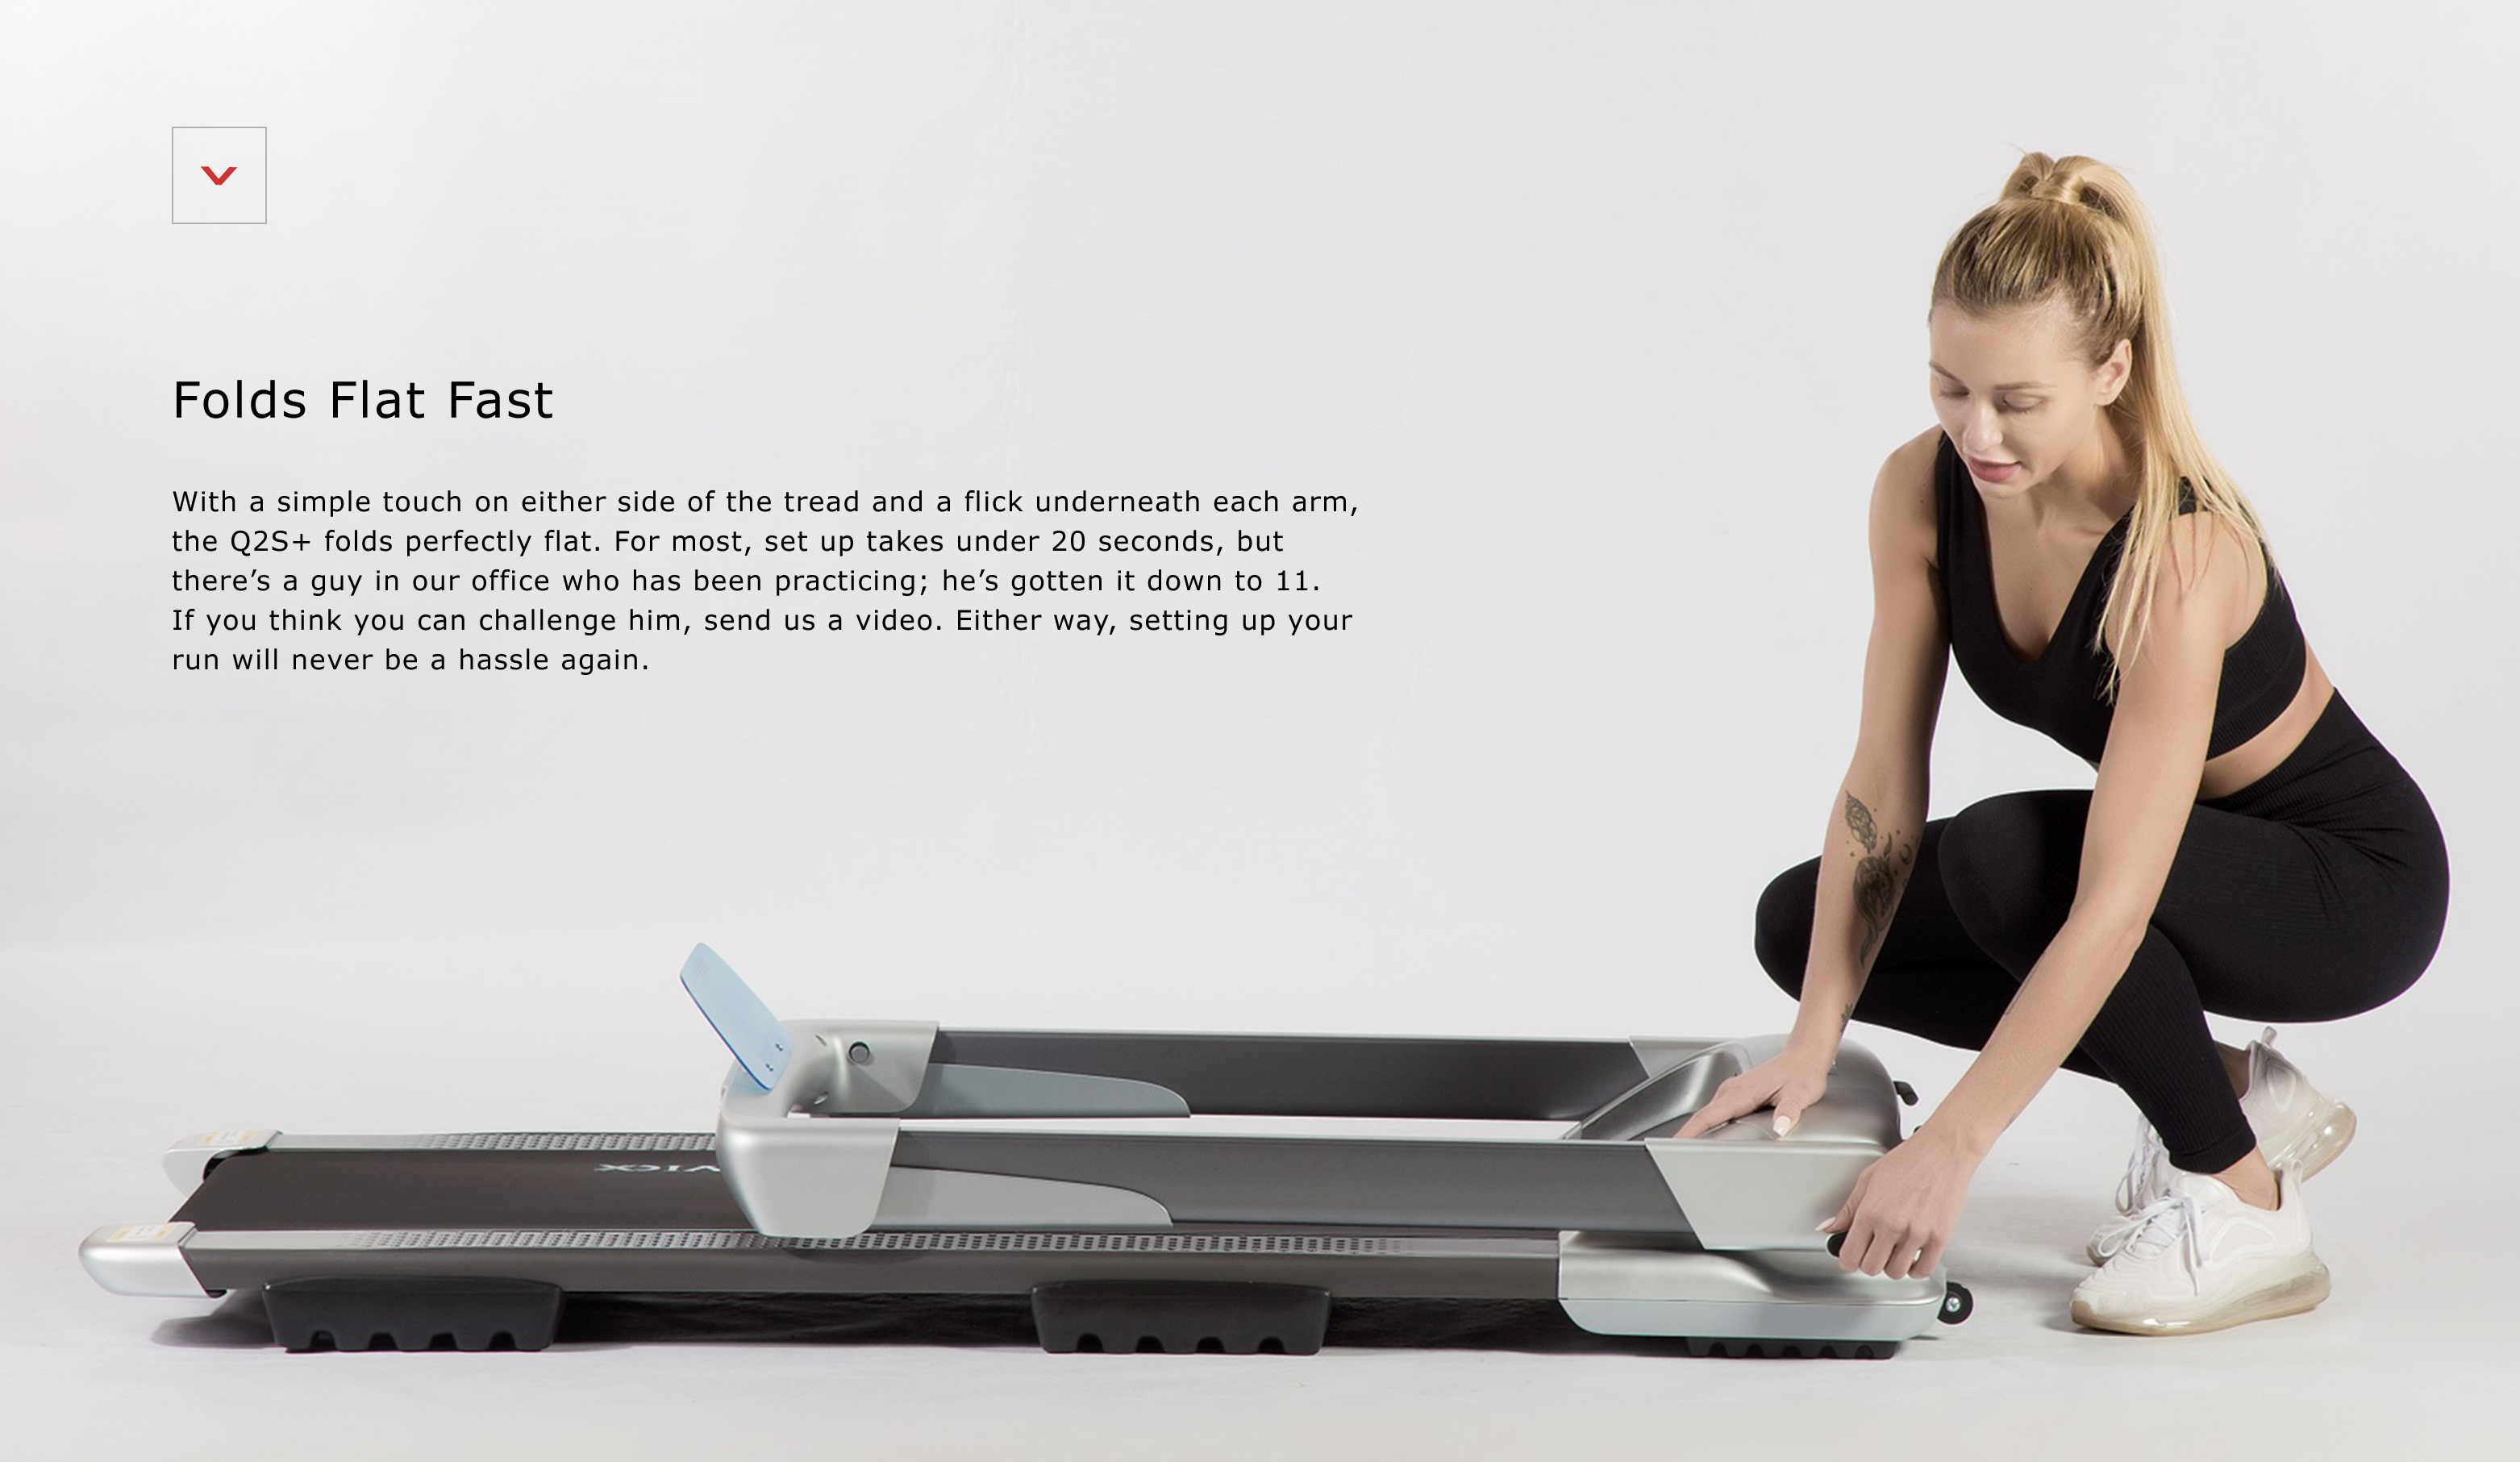 OVICX, OVICX OS-TMILL-Q2S-PLUS Wide Platform Q2S+ Folding Treadmill with Bluetooth Connectivity New